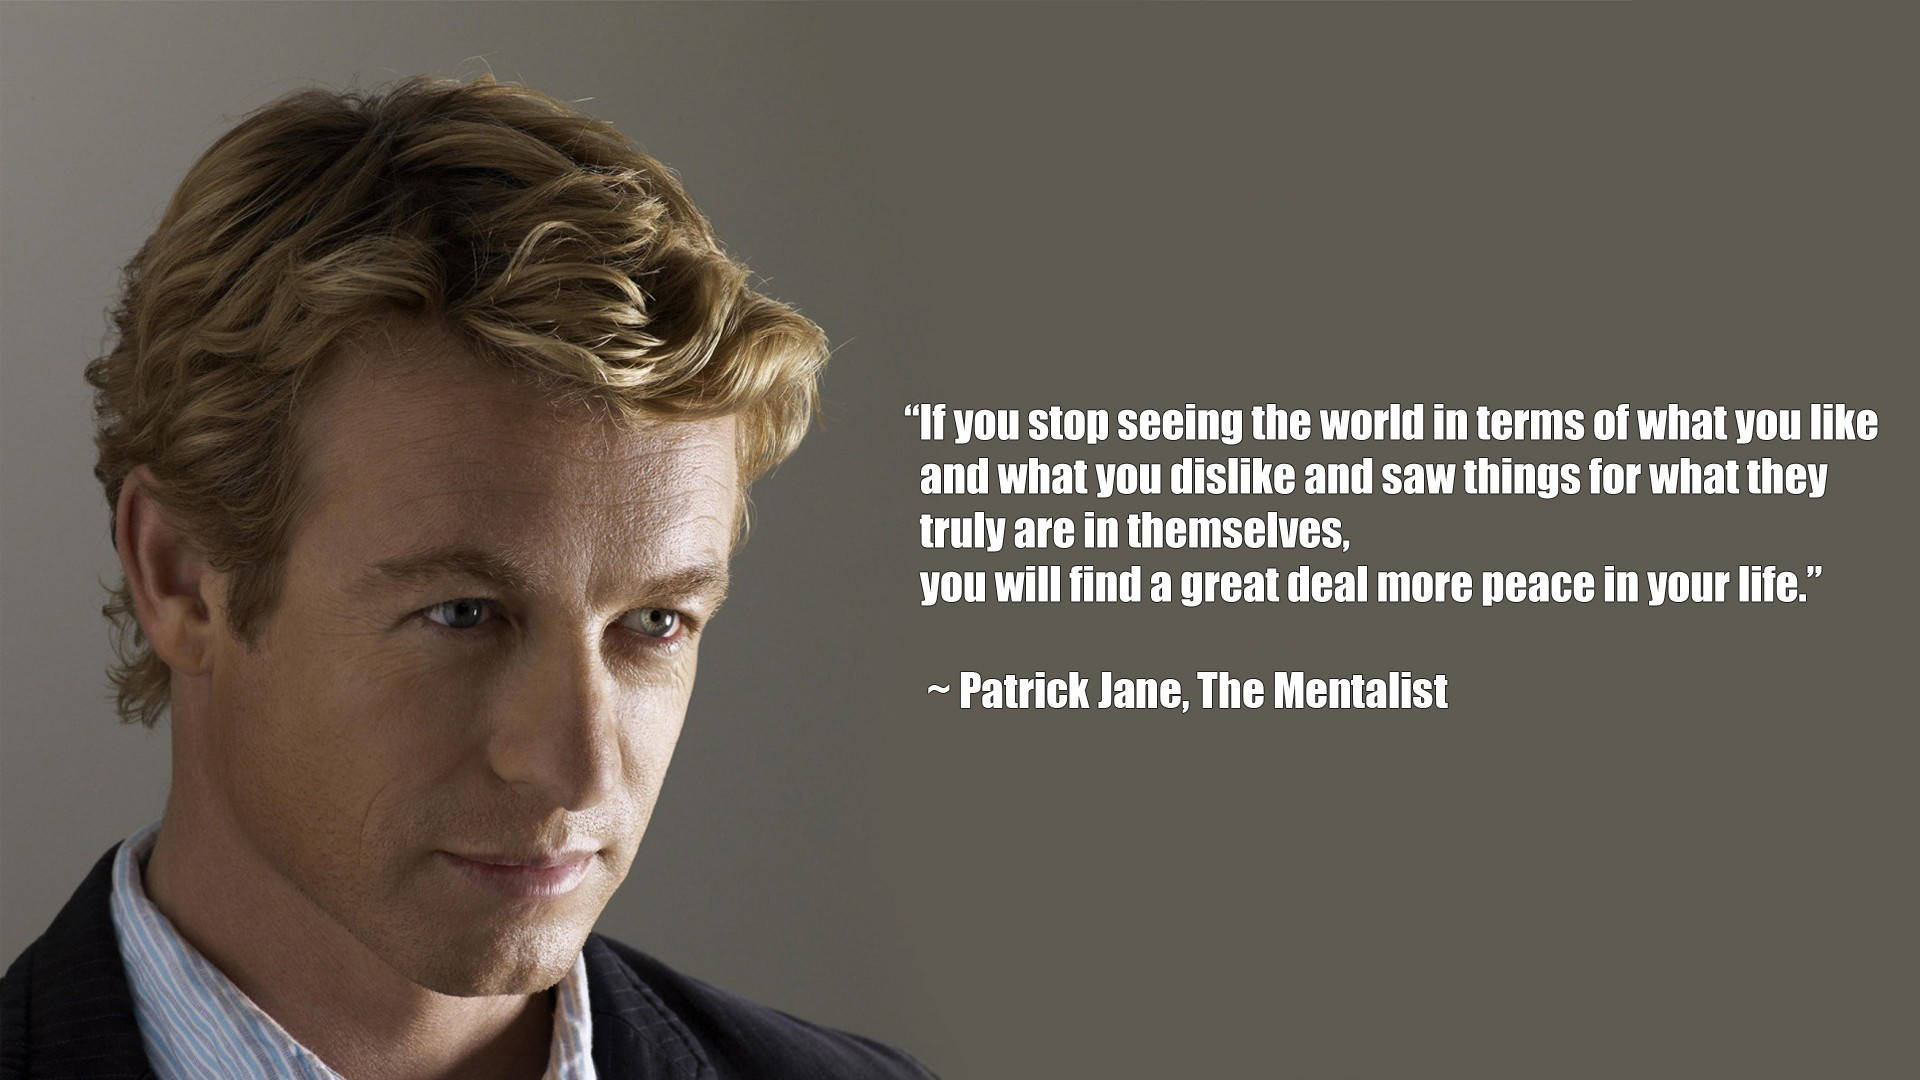 The Mentalist Quote By Patrick Jane Wallpaper